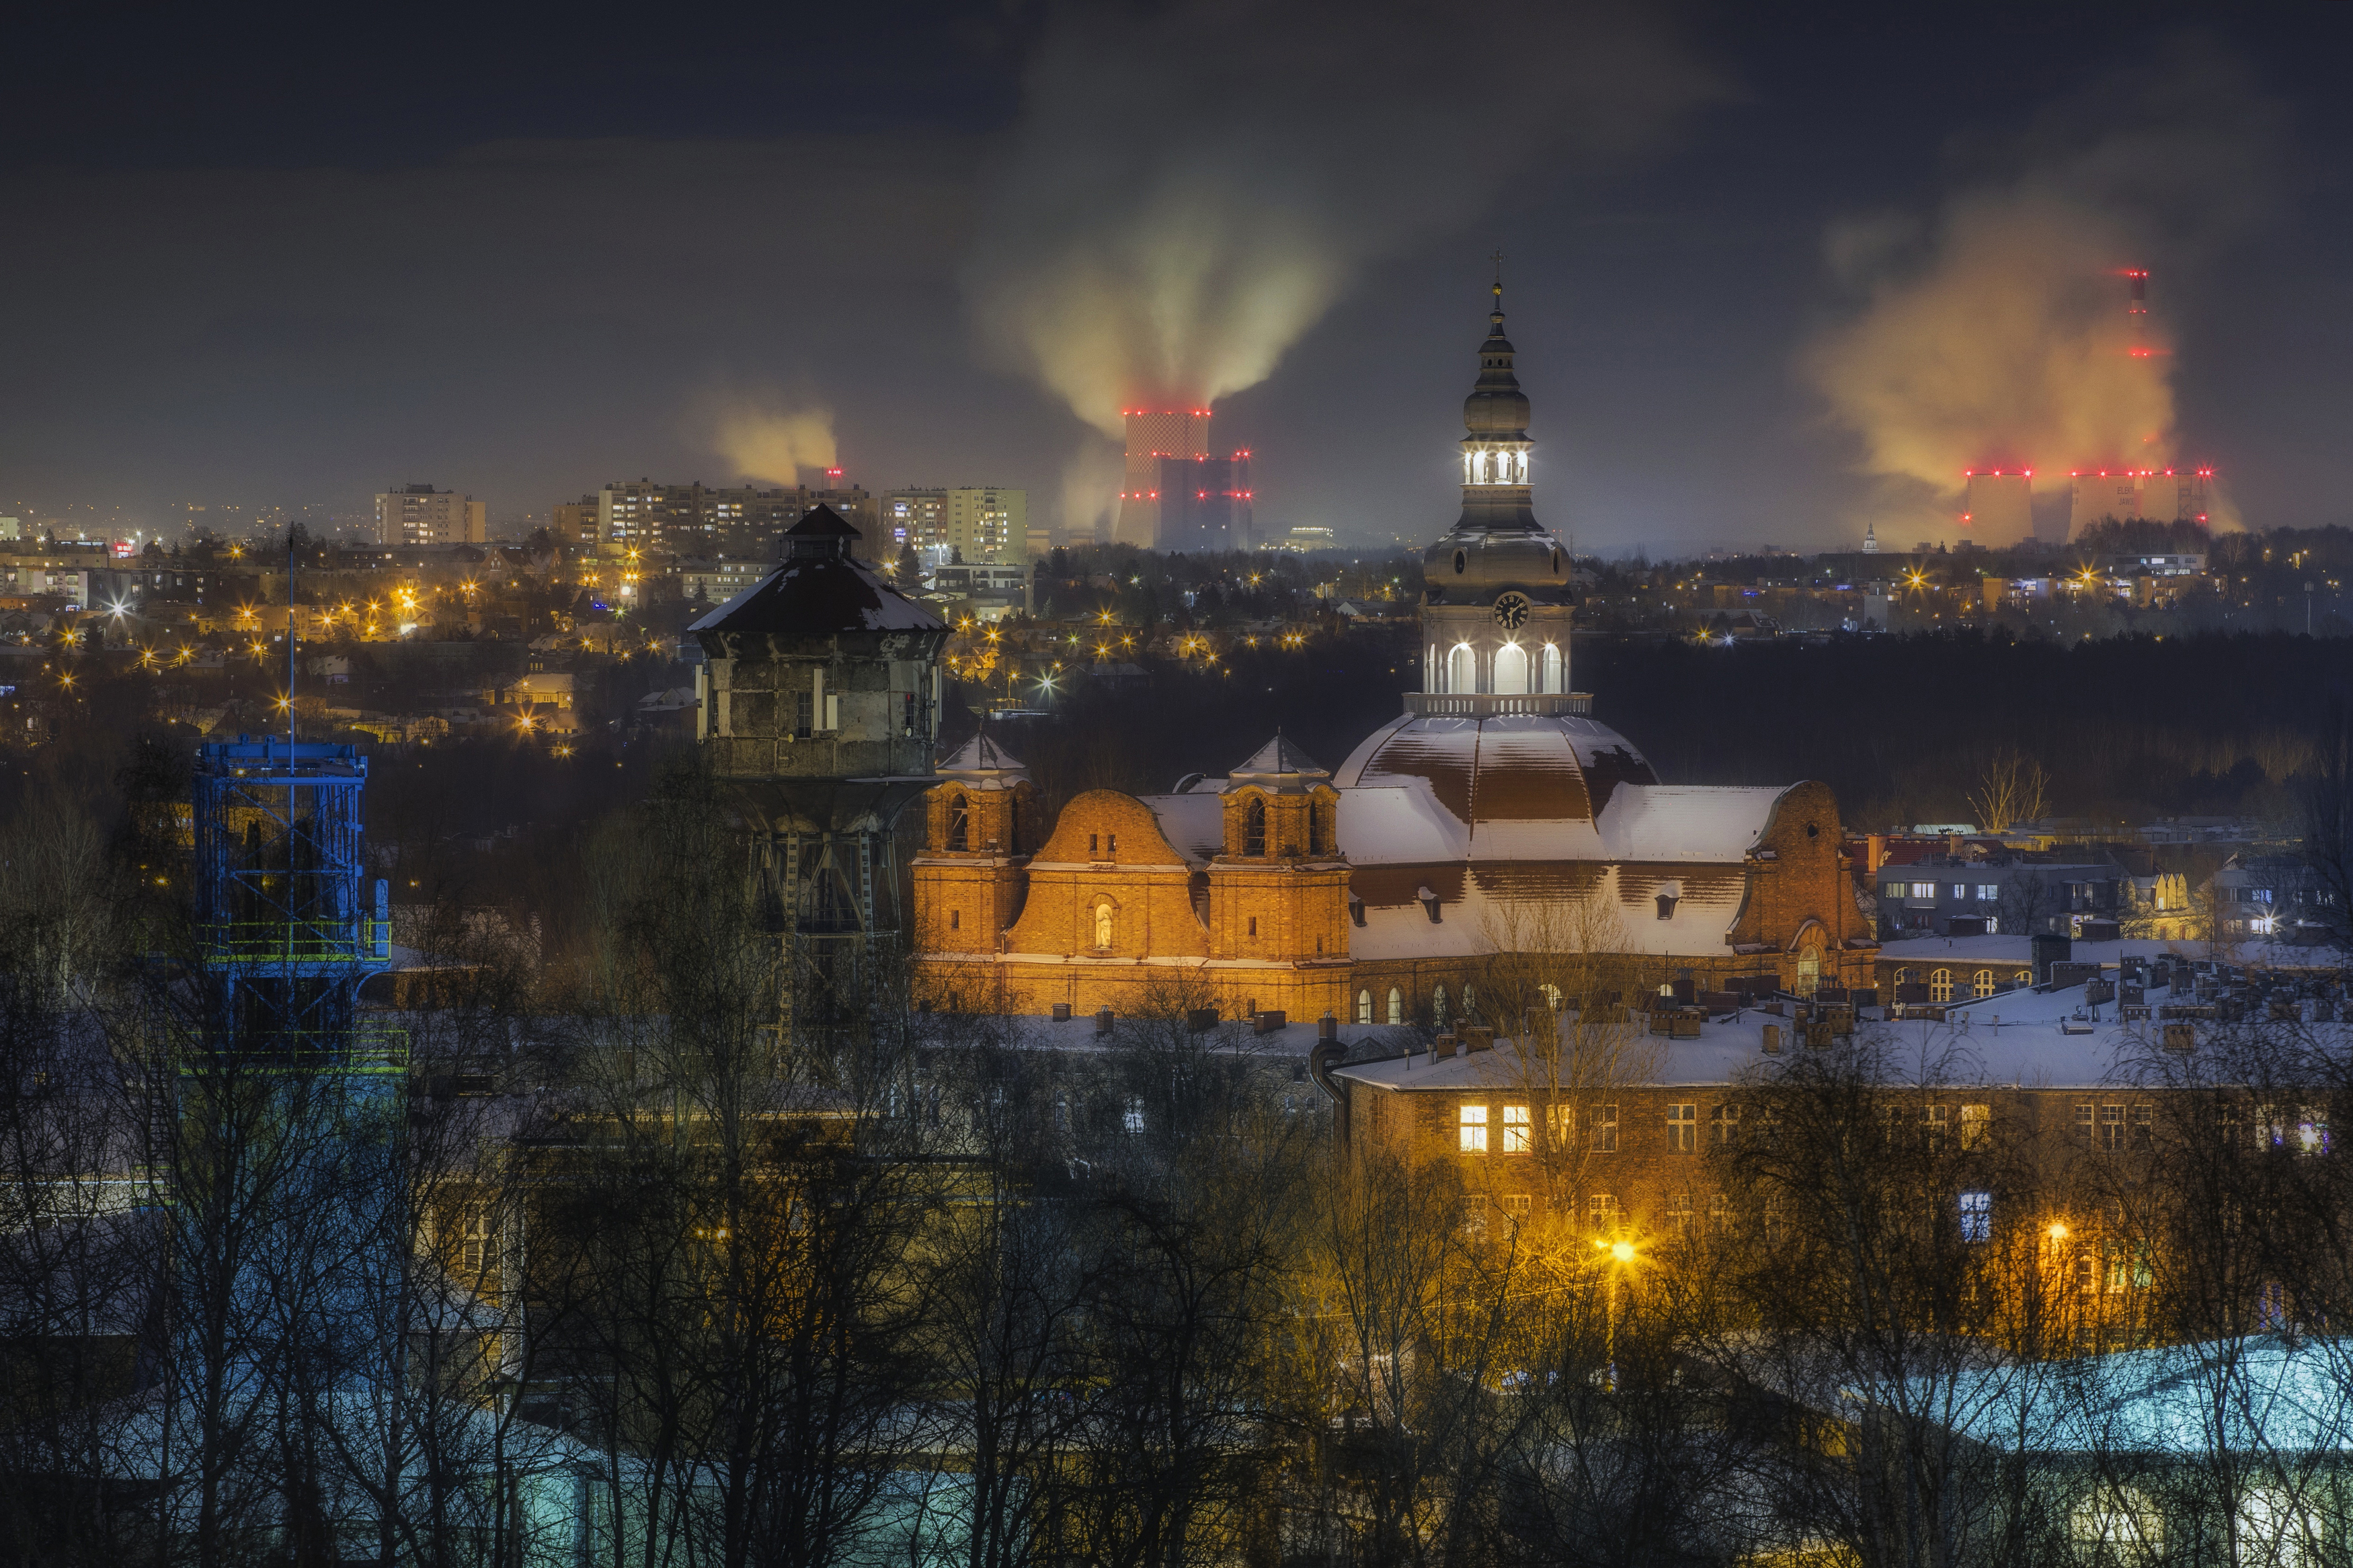 Landscape, Photography, Architecture, Katowice, City, Travel, Night, Church, Cityscape, Town, Old, Nikiszowiec, Landscape, Tower, Snow, Frost, Winter, Damian Cyfka